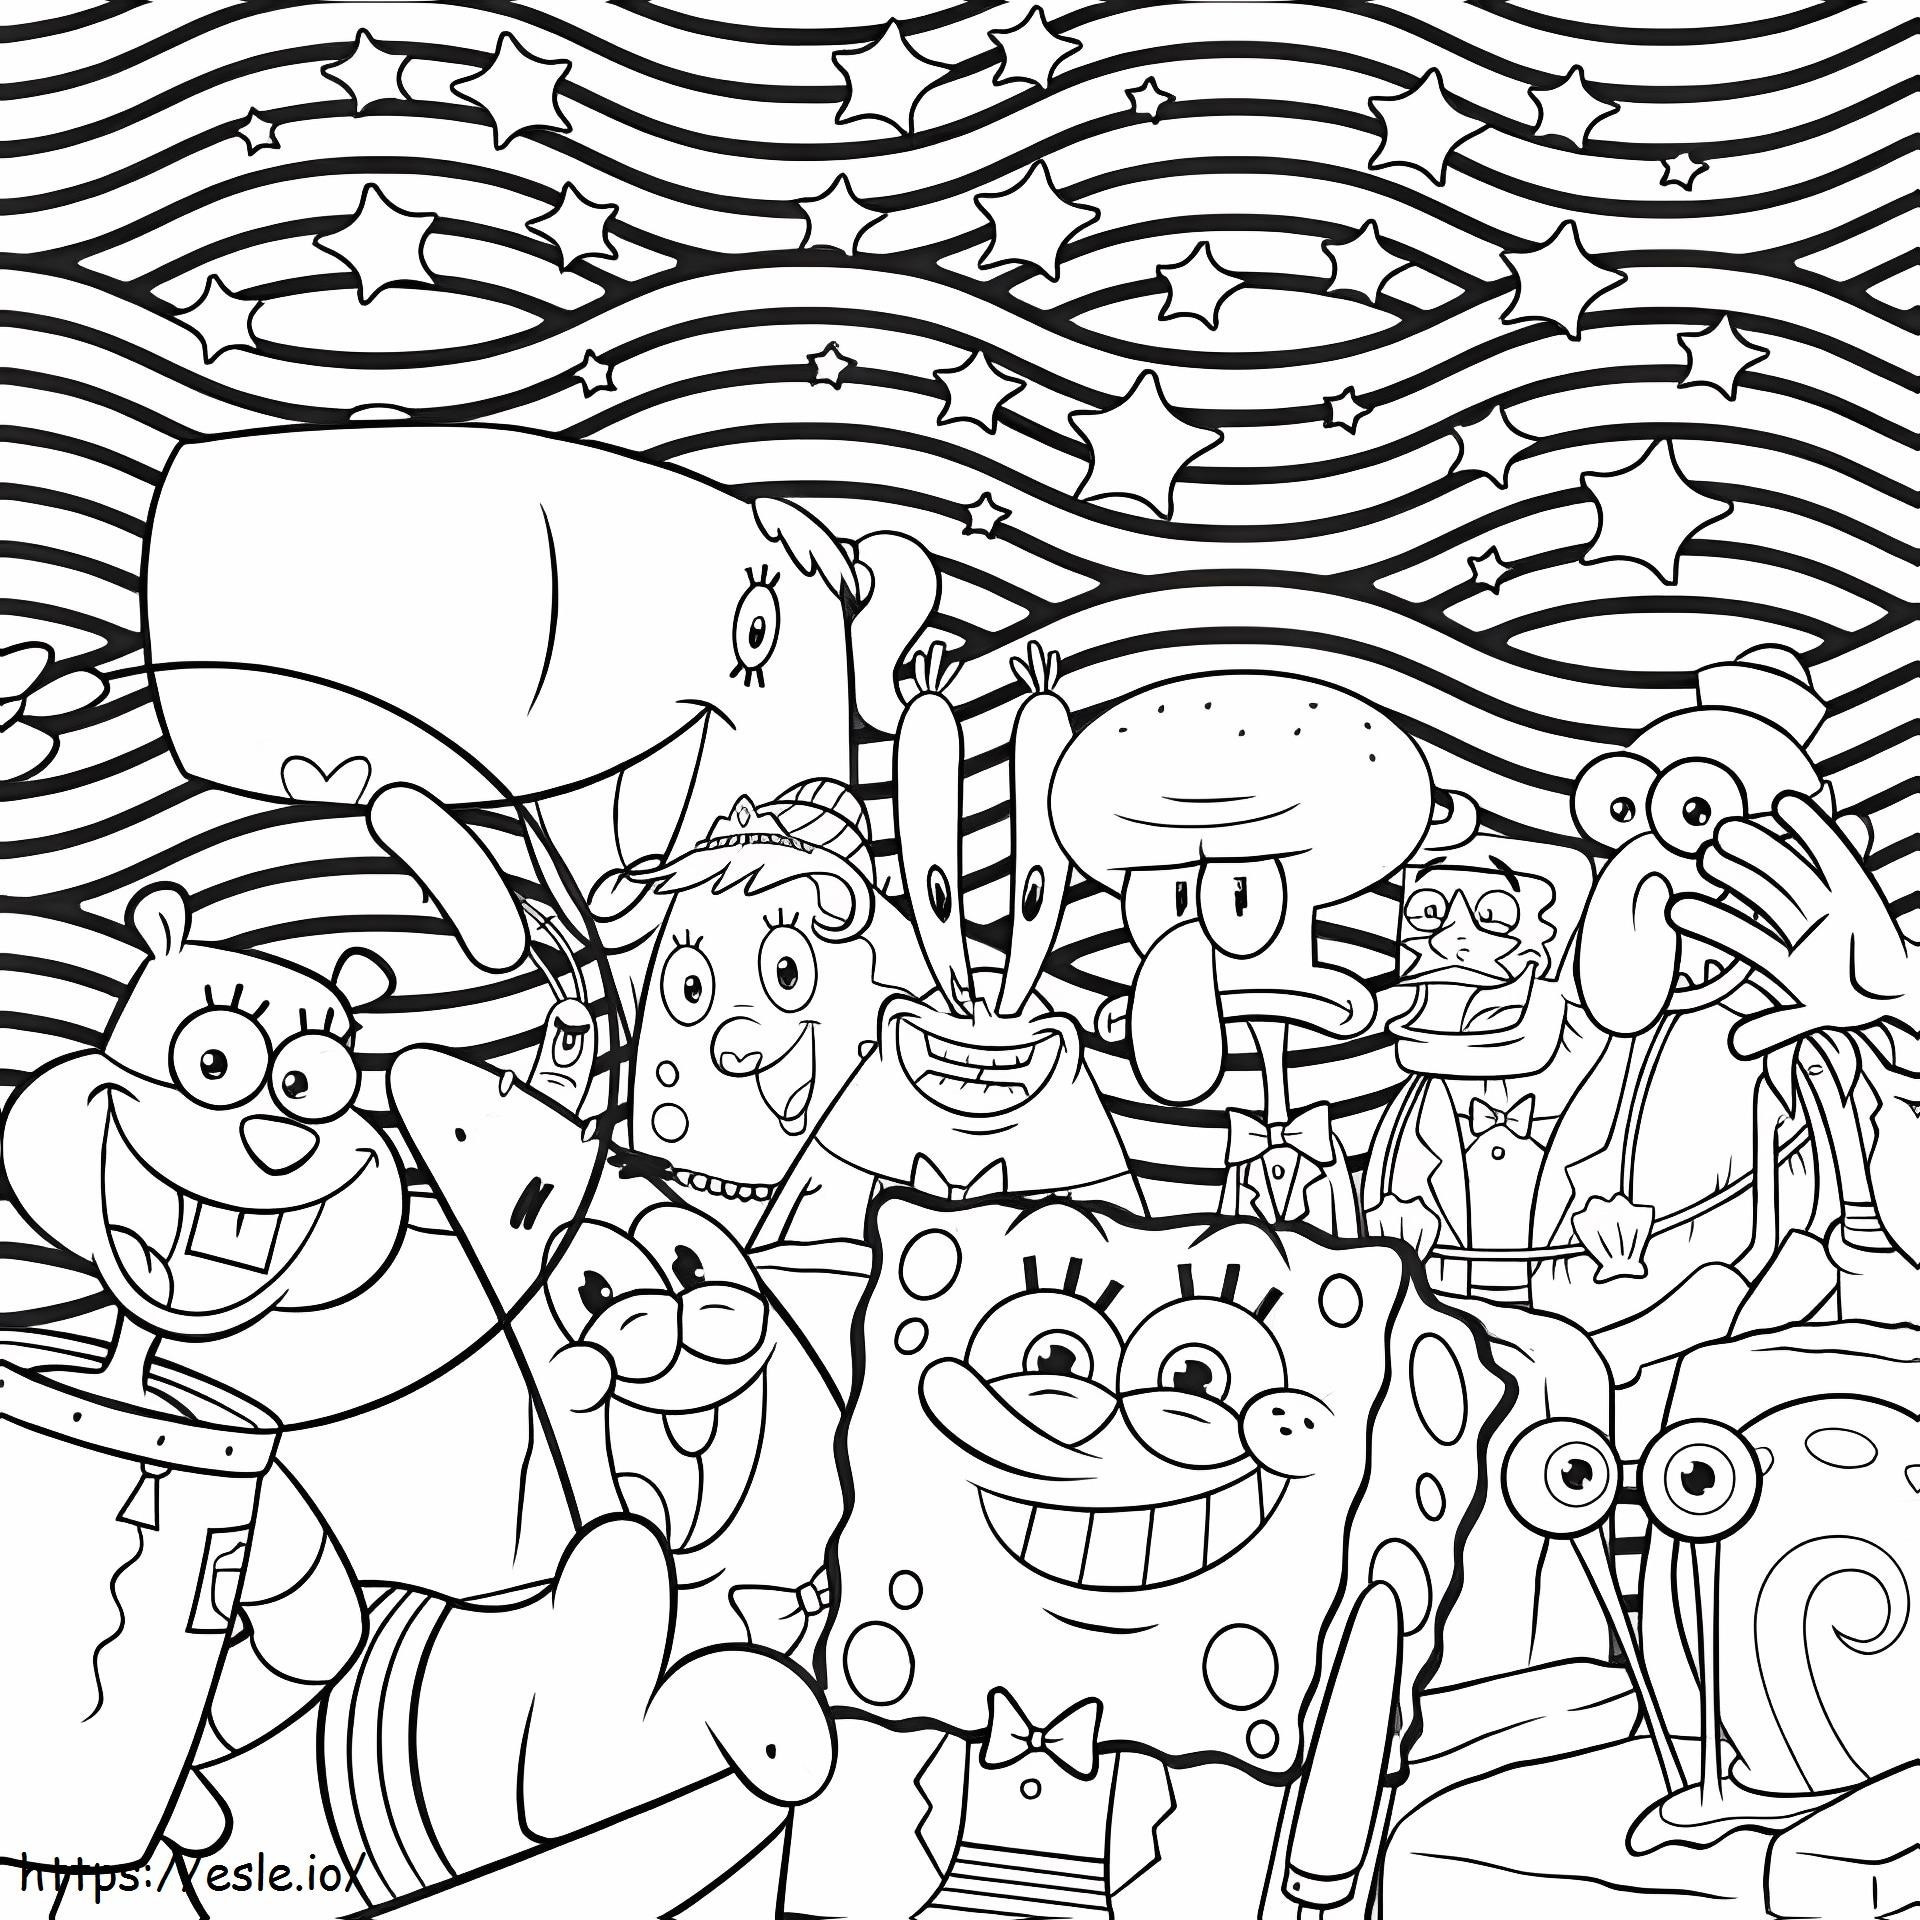 Mr. Krabs And Funny Friends coloring page